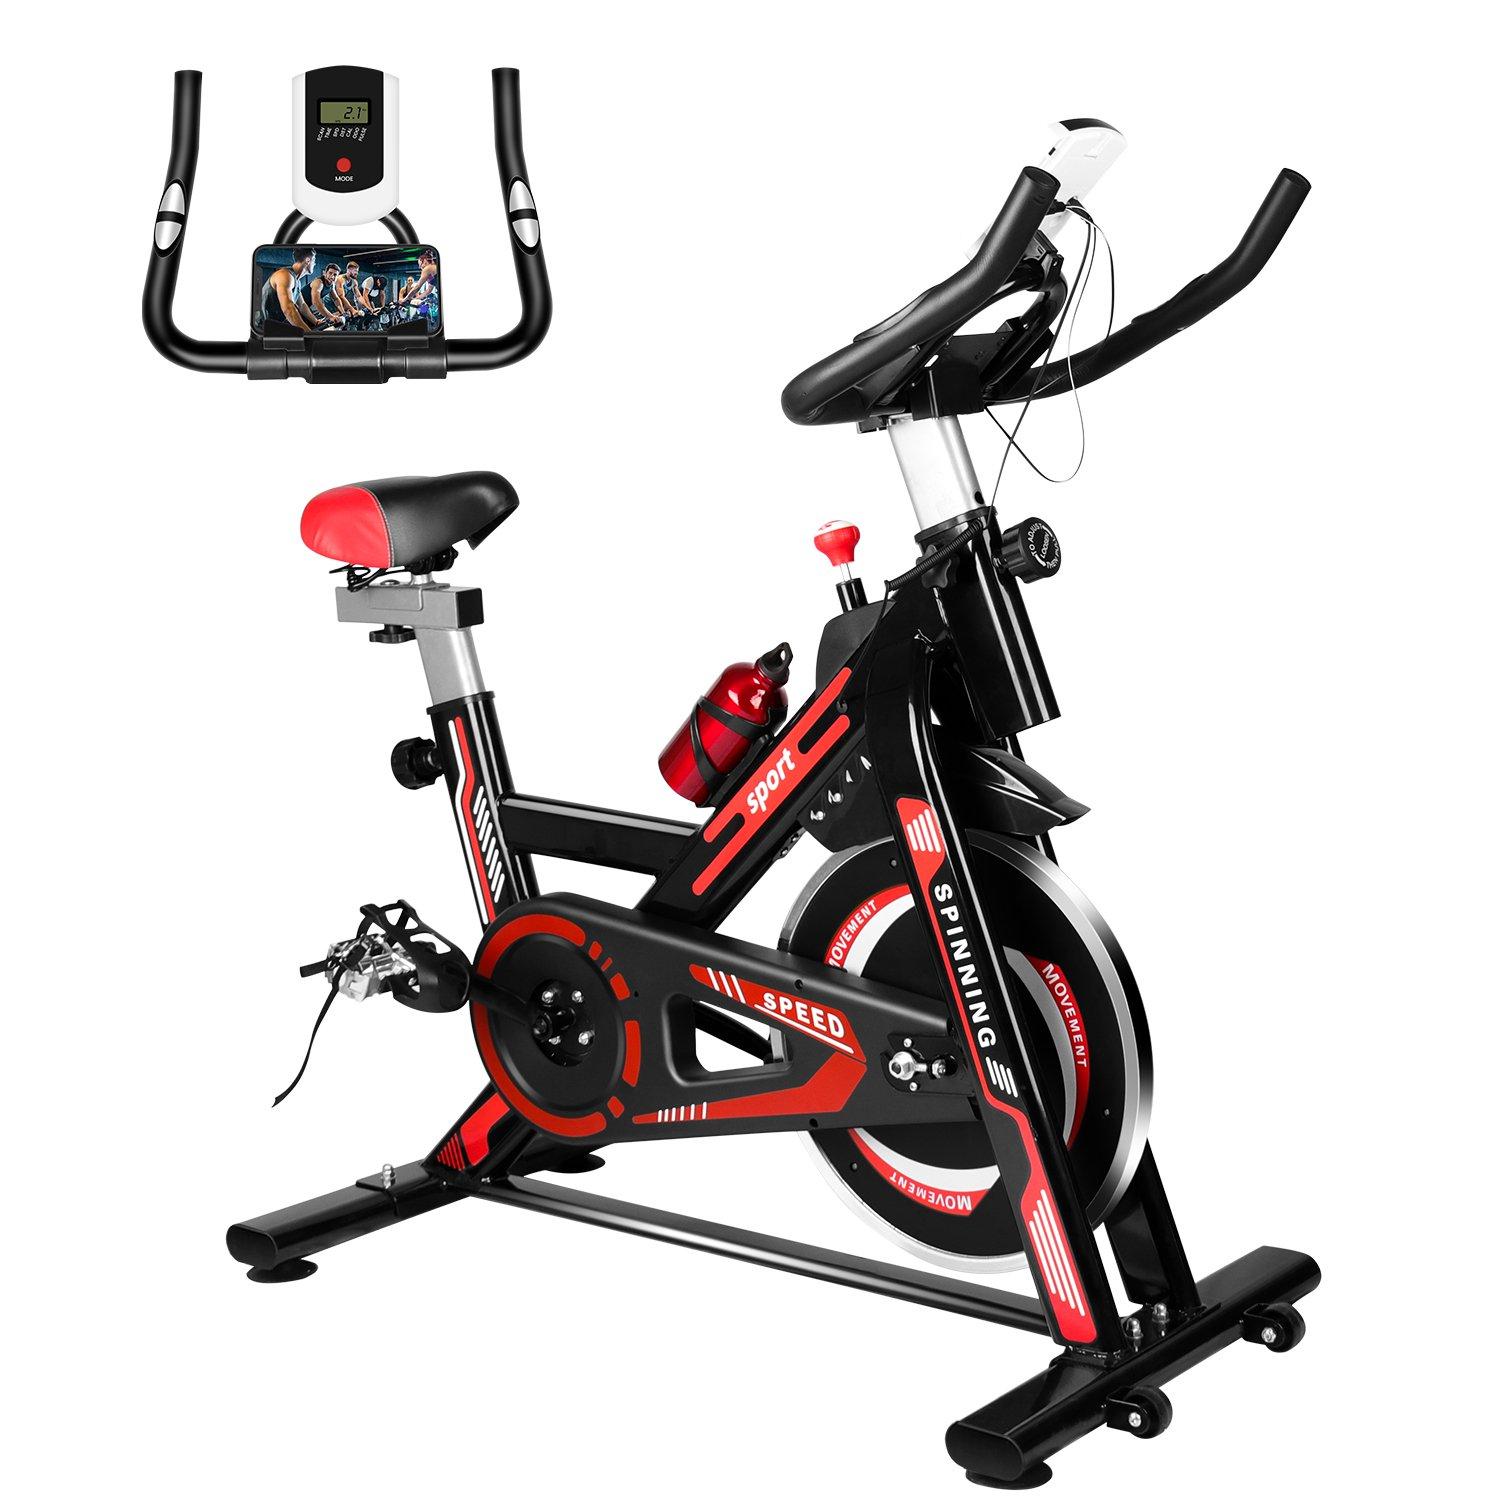 Spin Bike,Indoor Exercise Bike With Belt Drive with 8KG Heavy Flywheel,Comfortable Seat and LCD Moni